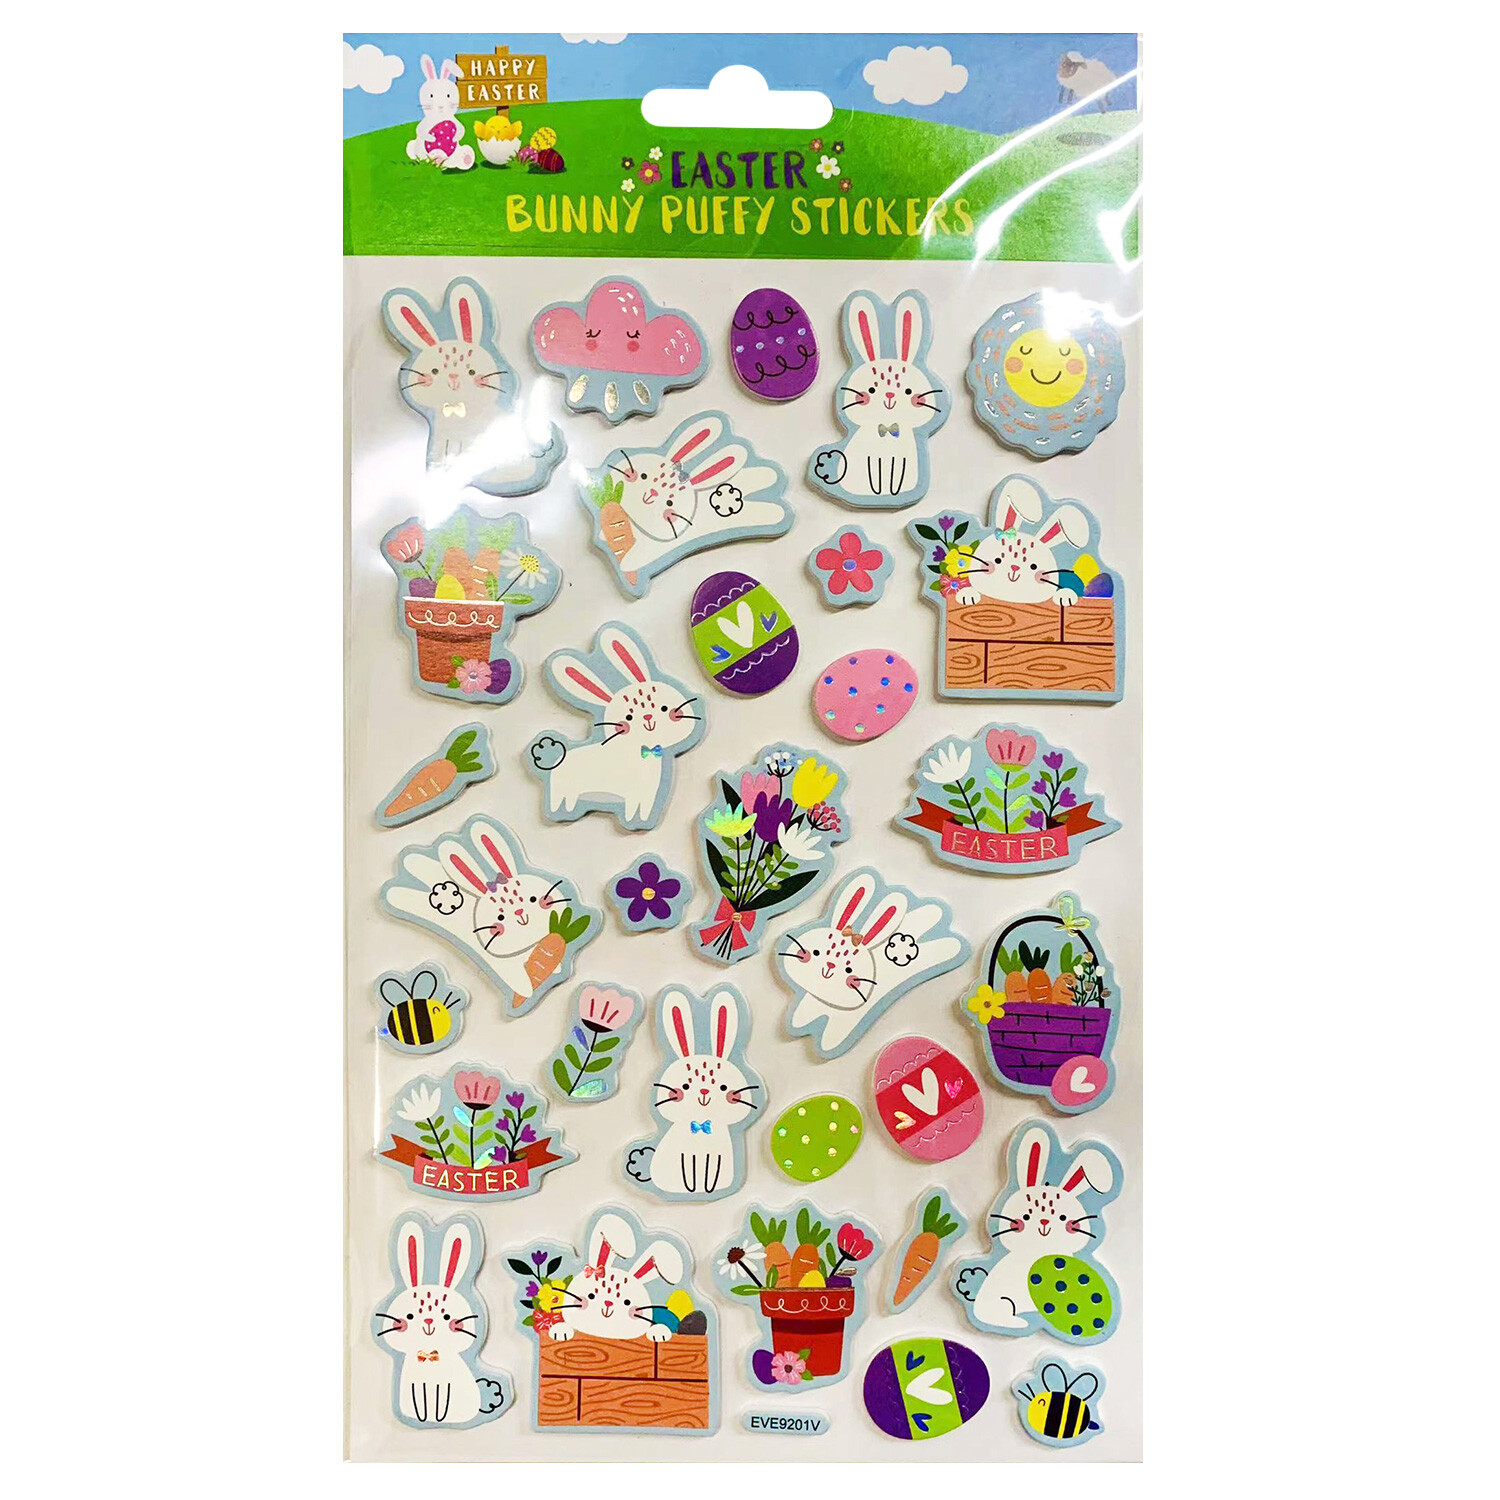 Cute Easter Stickers Image 1